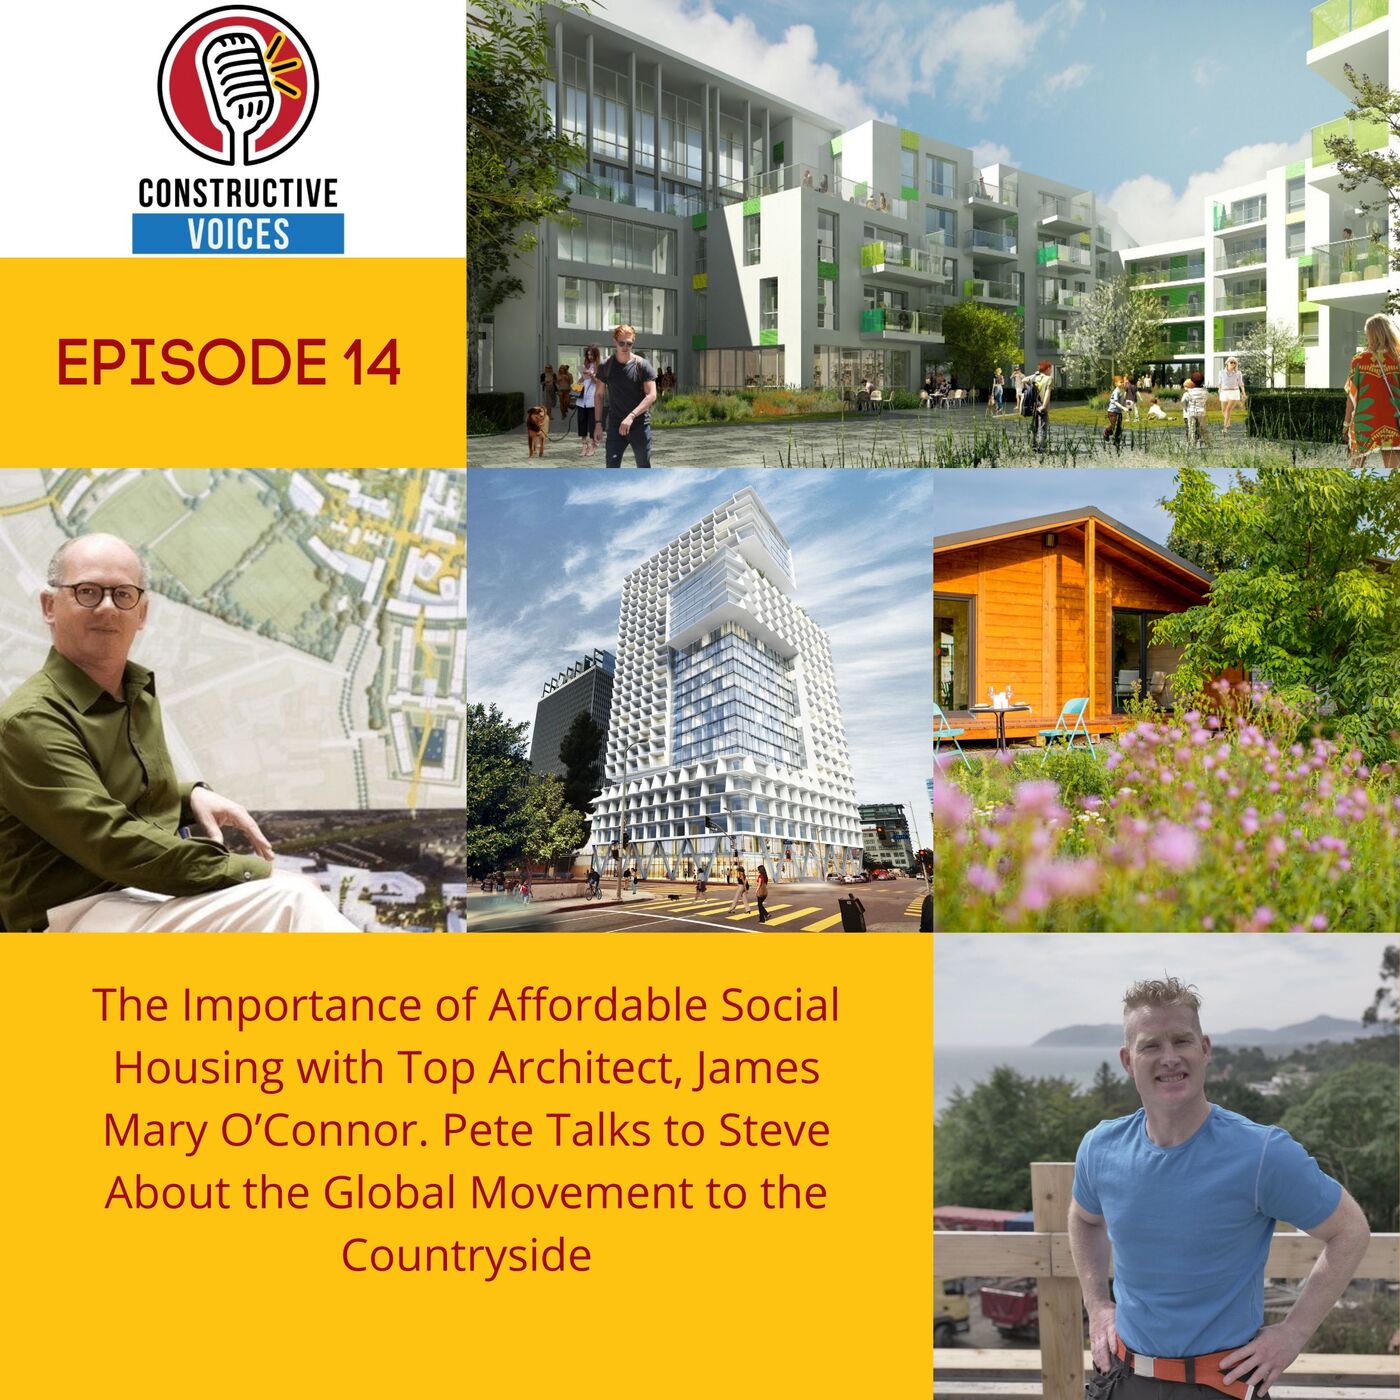 The Importance of Affordable Social Housing with Top Architect, James Mary O’Connor. Pete Talks to Steve About the Global Movement to the Countryside